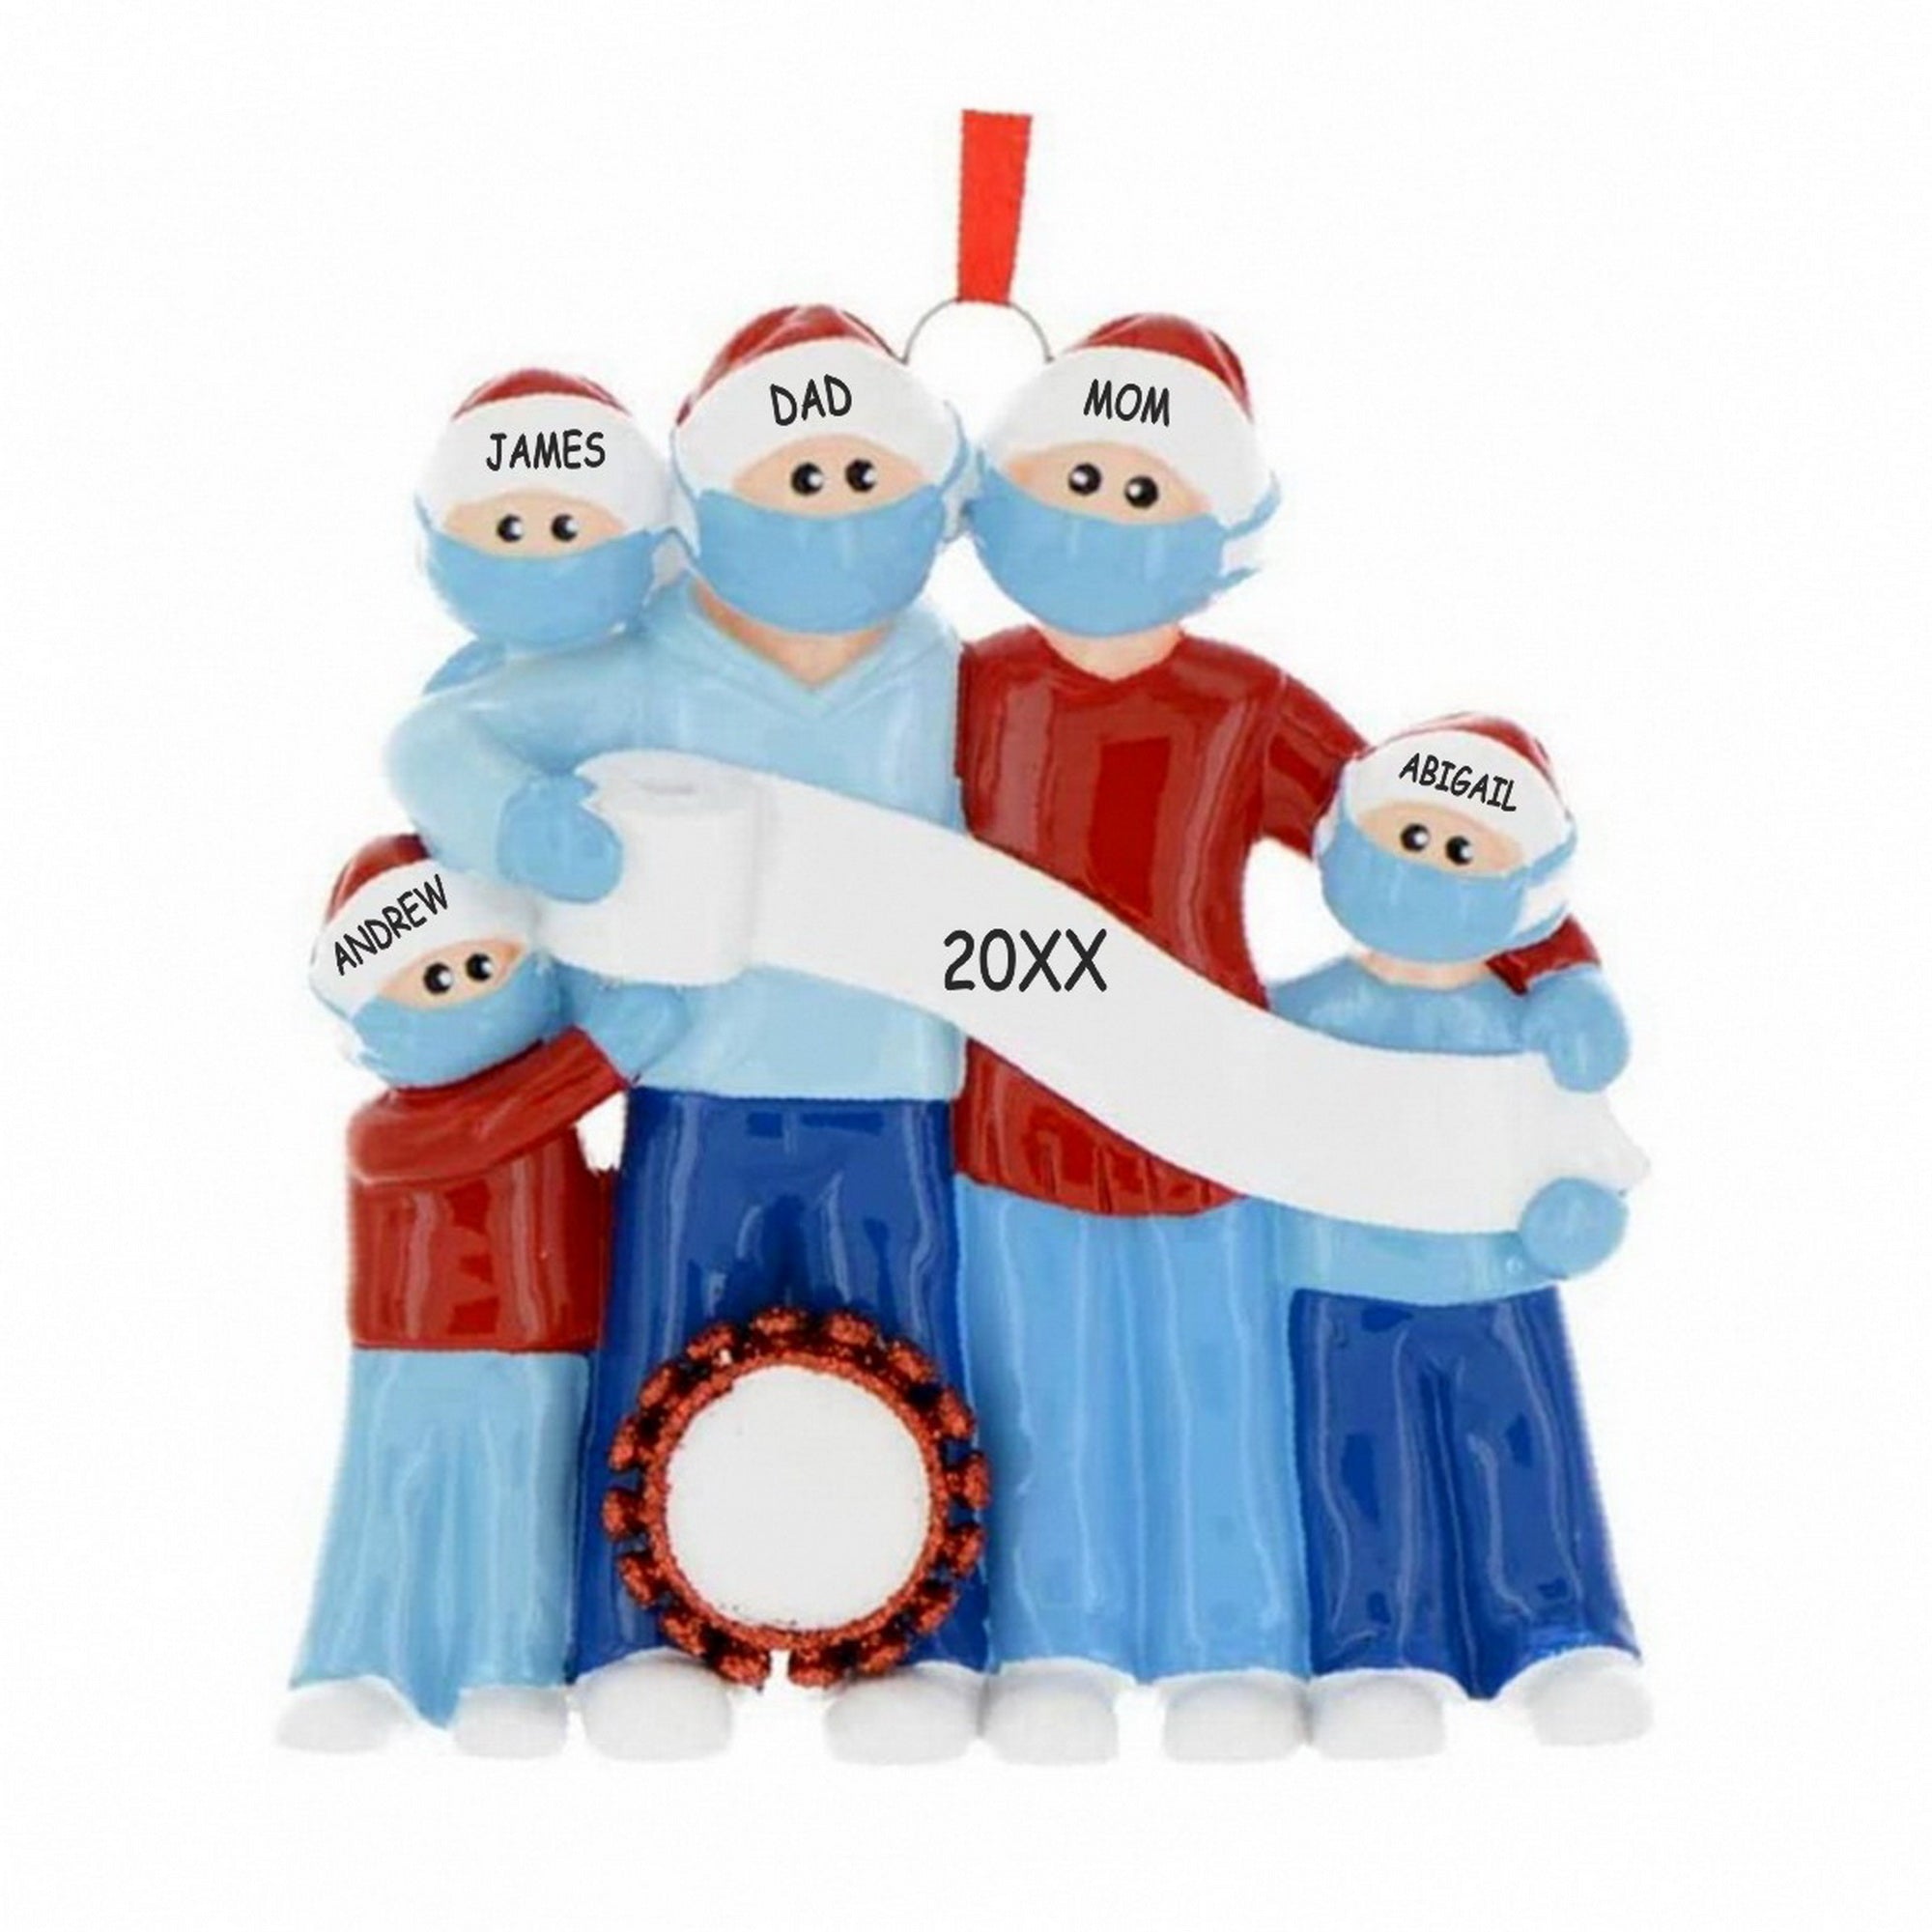 Personalized Pandemic TP Family Christmas Ornament - Family of 5